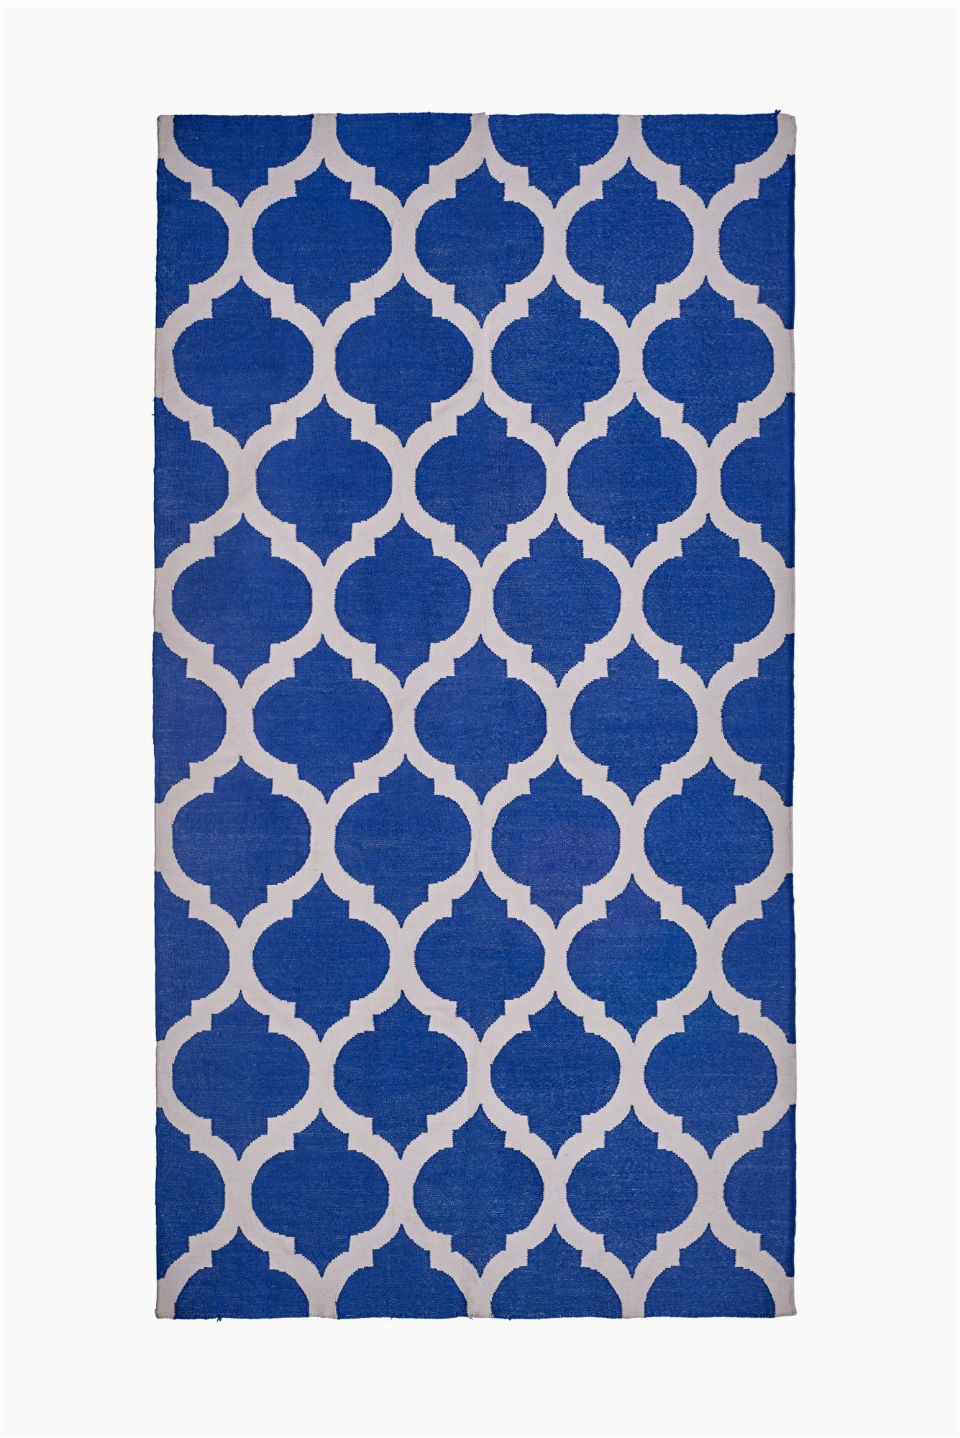 Blue and White Dhurrie Rug Trellis Cotton Dhurrie In Blue and White